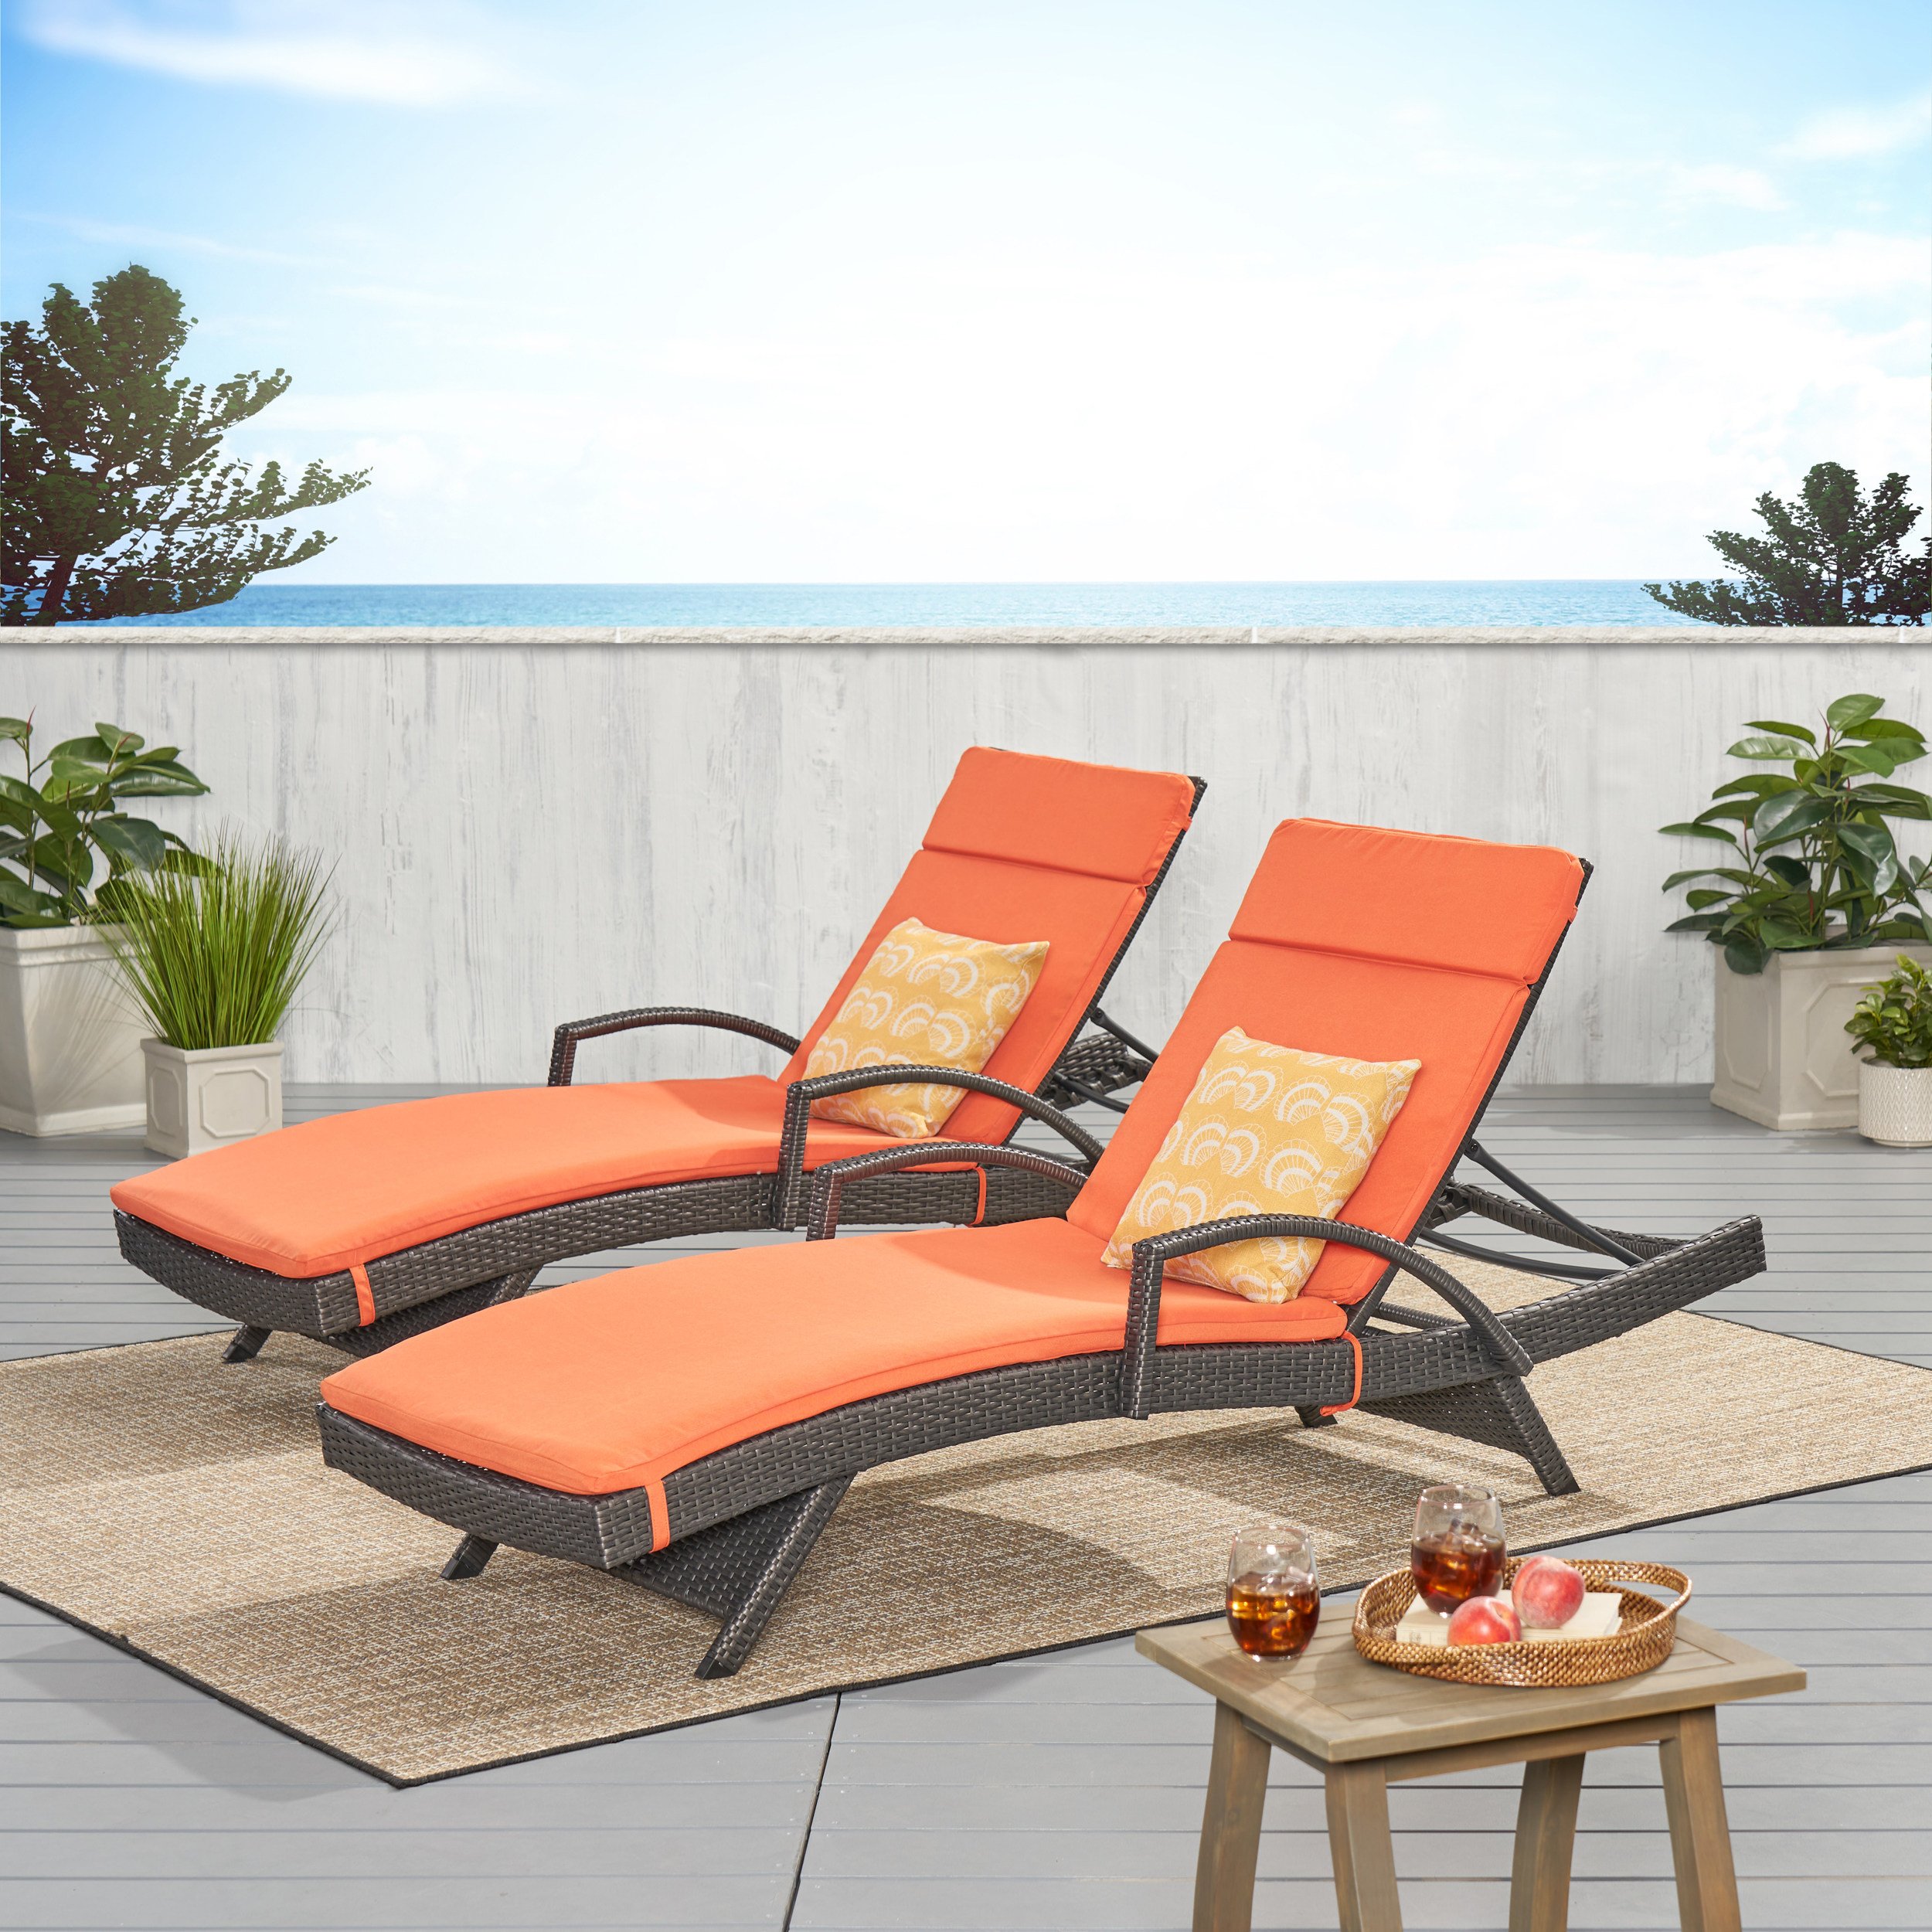 Soleil Outdoor Wicker Chaise Lounges With Water Resistant Cushions (Set Of 2) - Brown & White Stripe